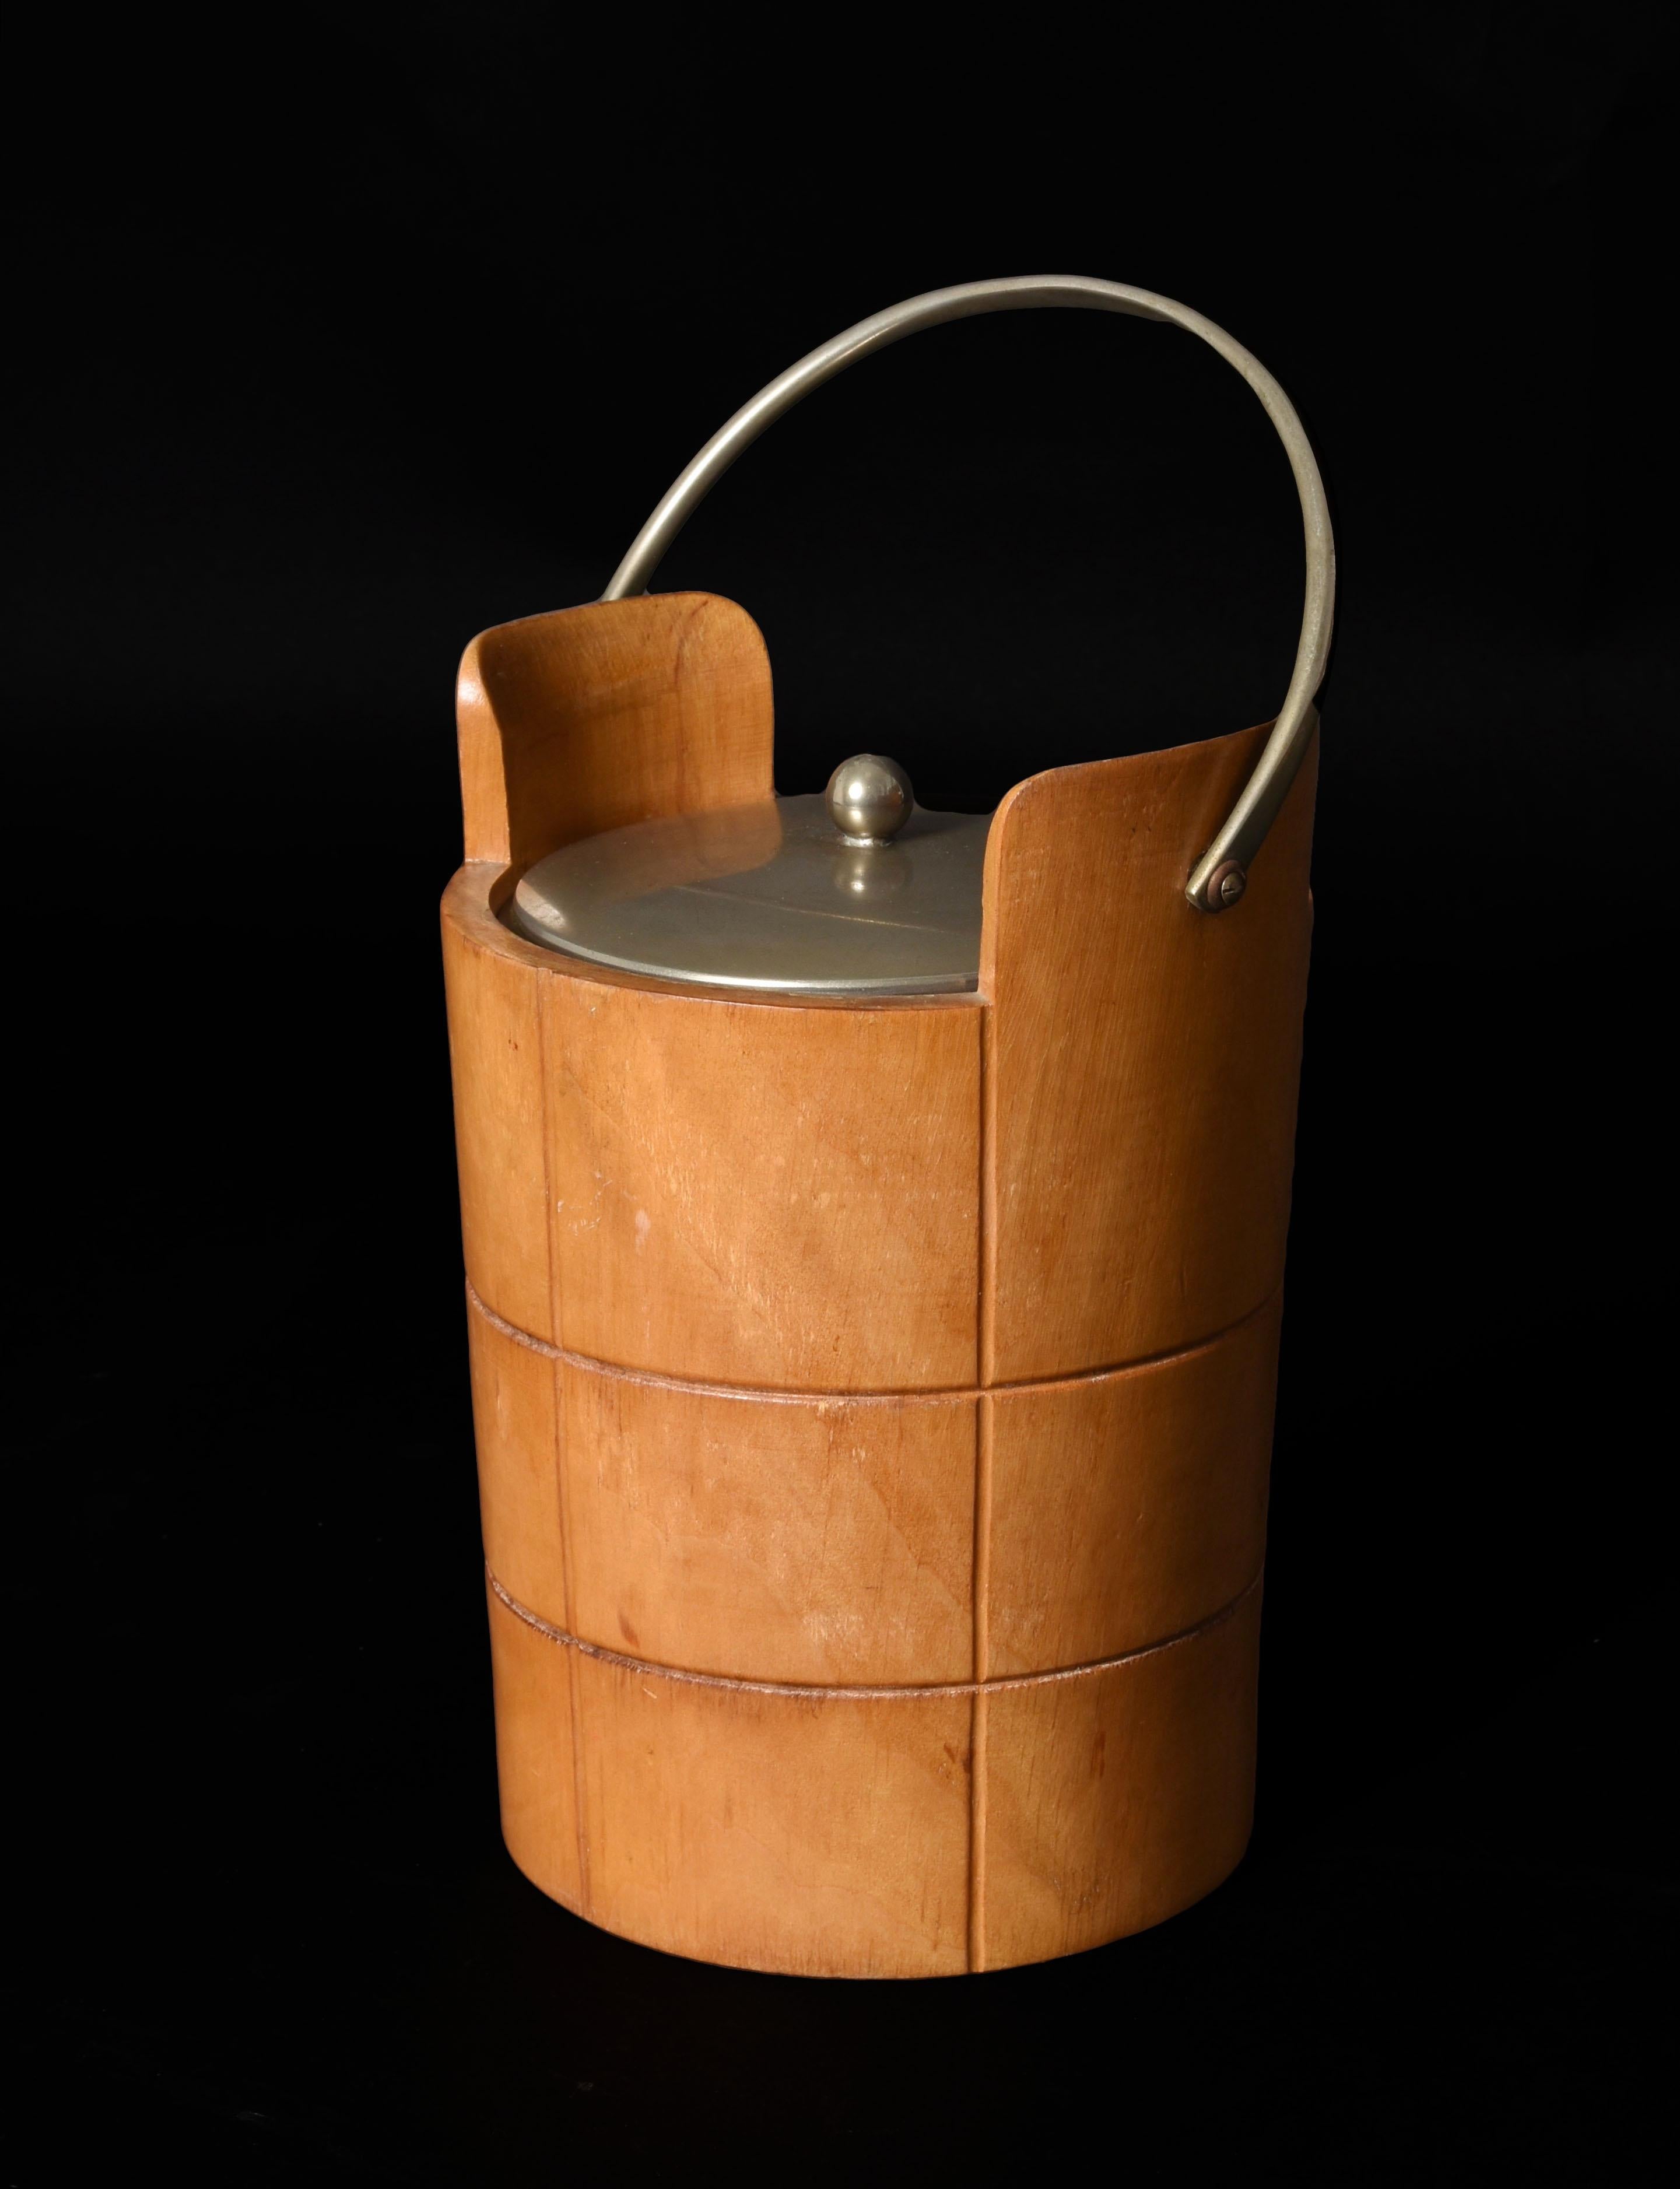 Italian Ice Bucket for Macabo in Carved Wood and Metal, Italy 1950s by Aldo Tura